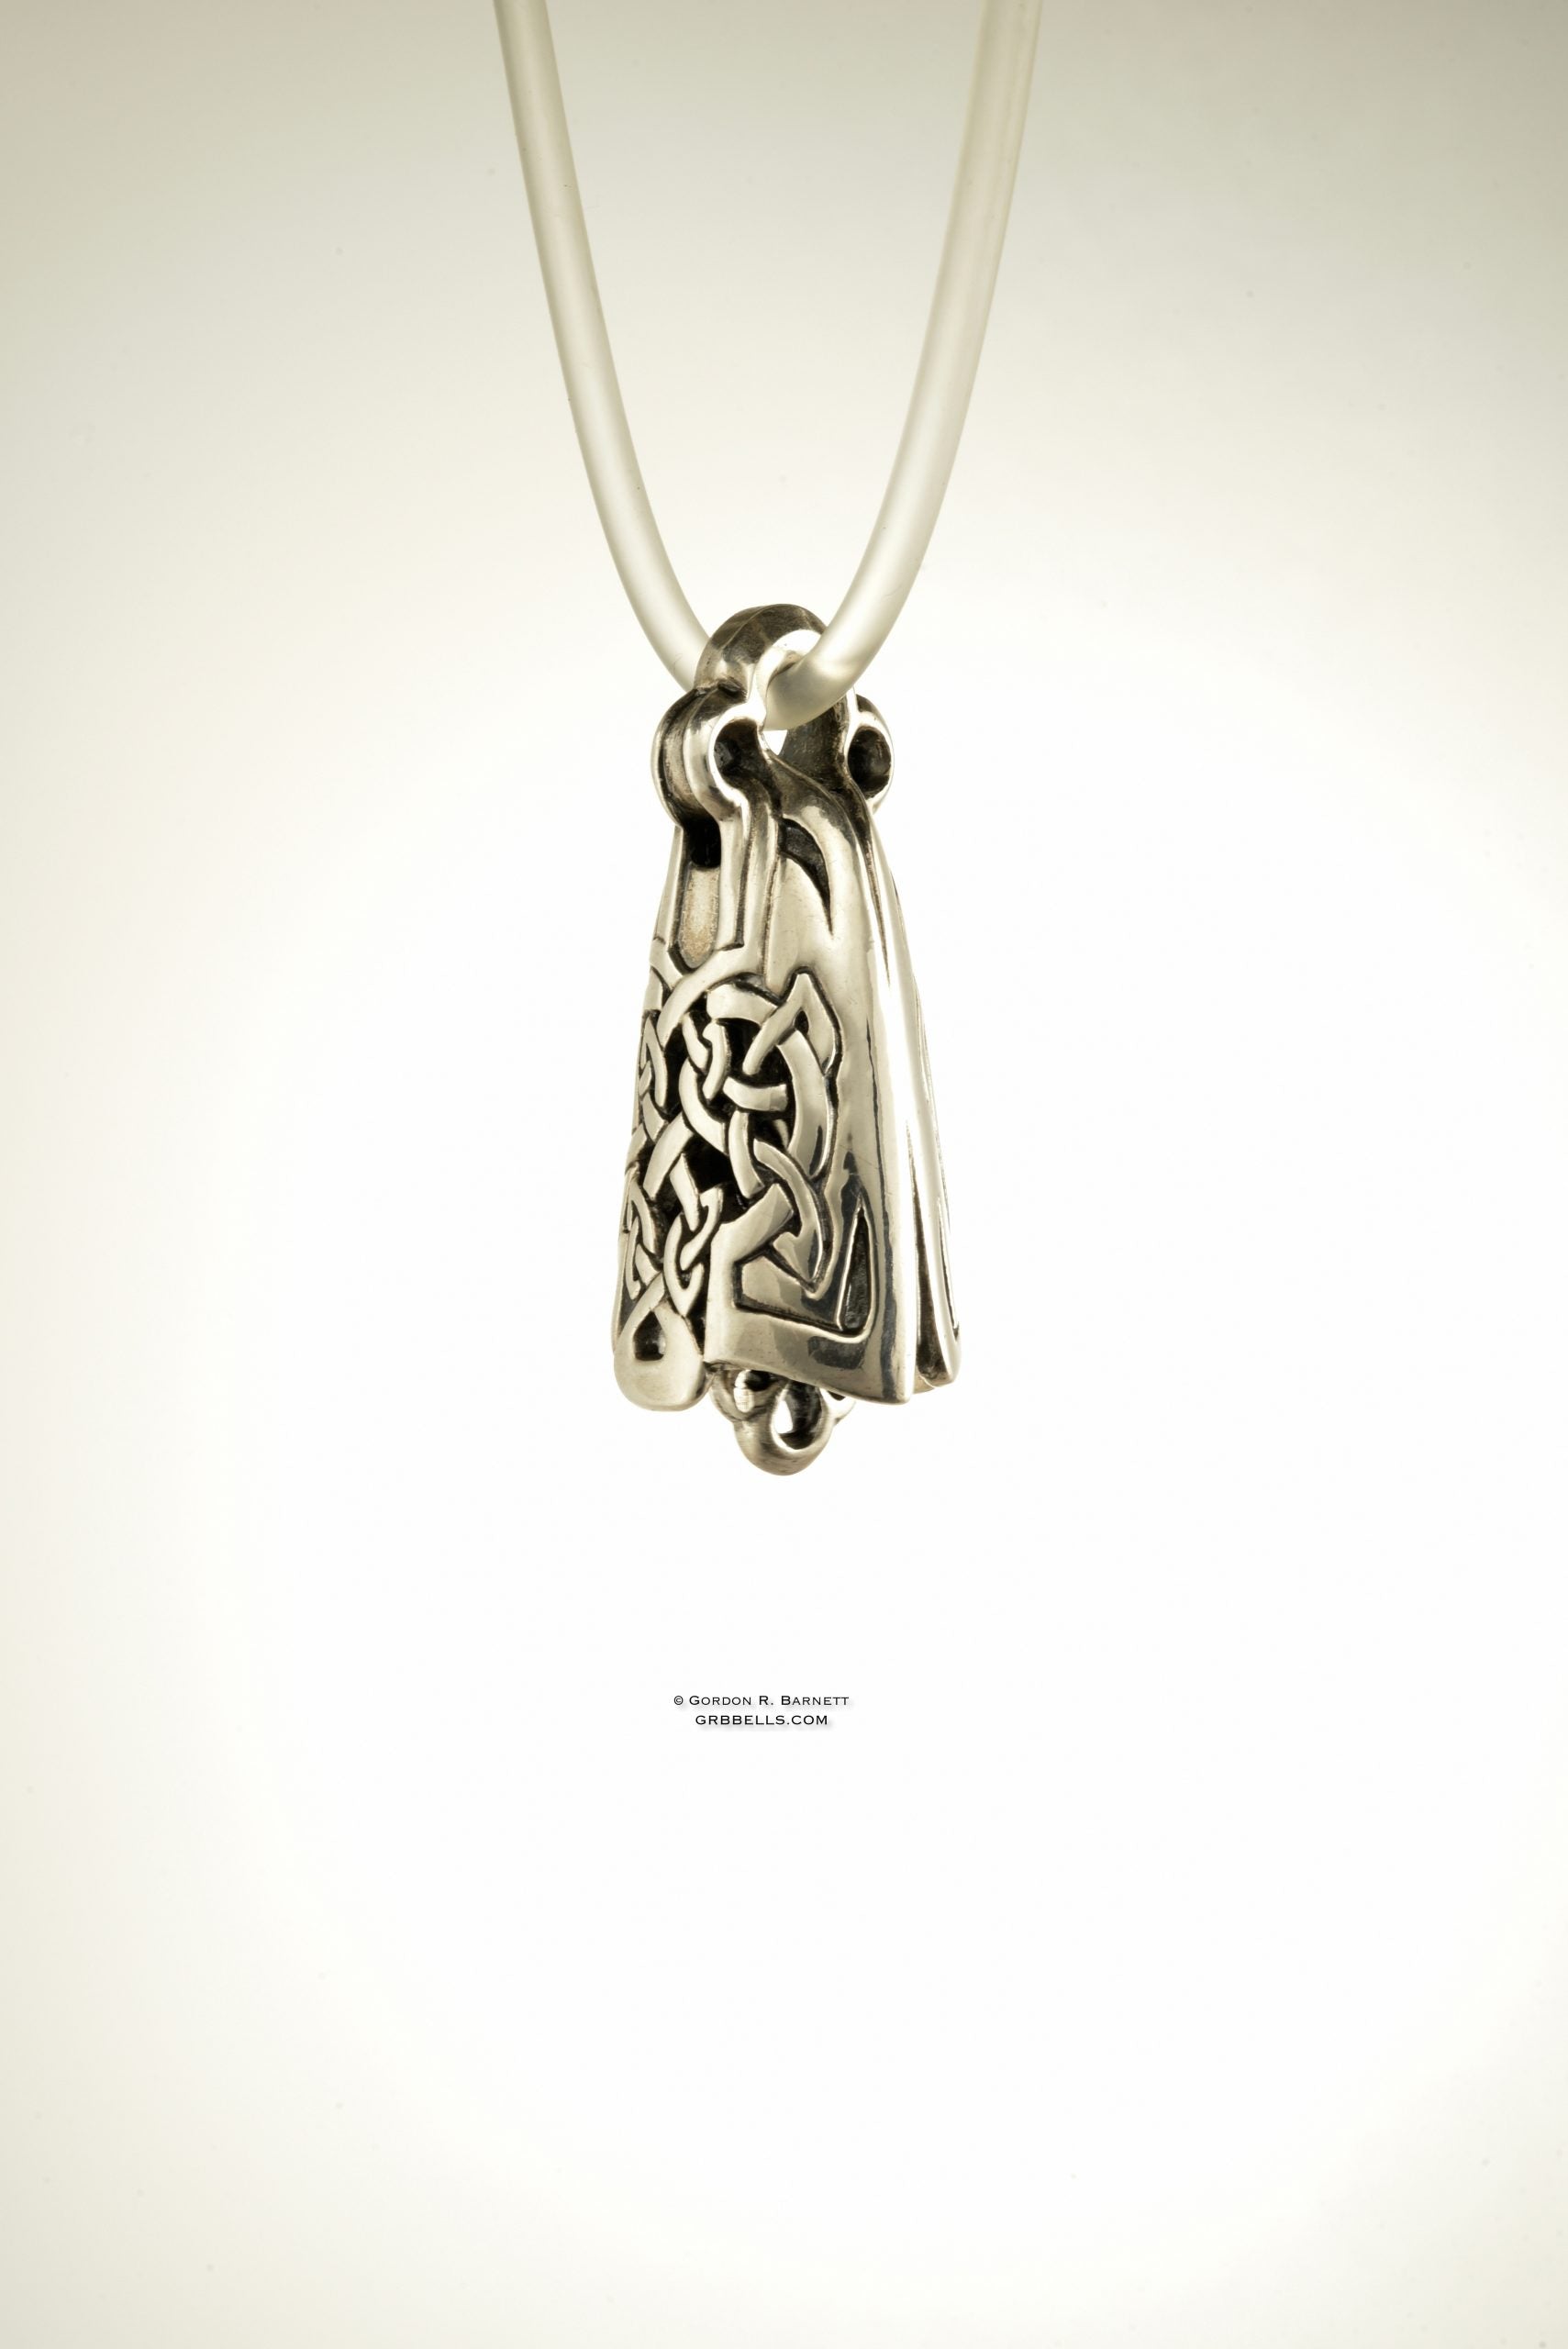 CELTIC LUTE jewelry bell necklace three-quarter view in sterling silver is a handmade pendant is made with lost wax casting, then polished and assembled in Washington state perfect gift for celtic musician 